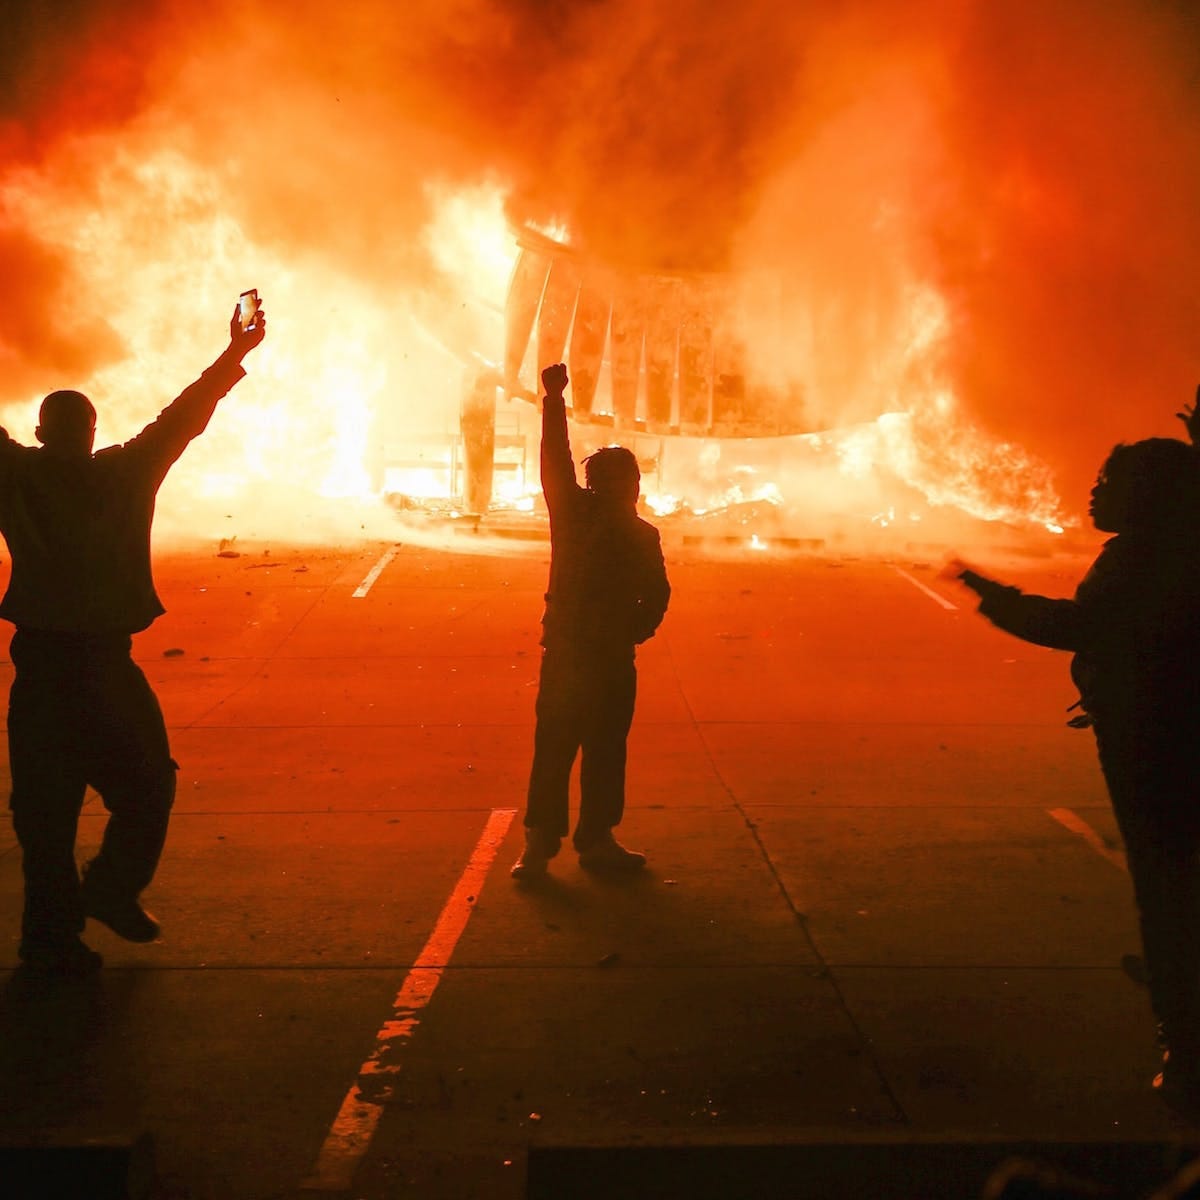 Timing of the Ferguson case may have made the riots worse